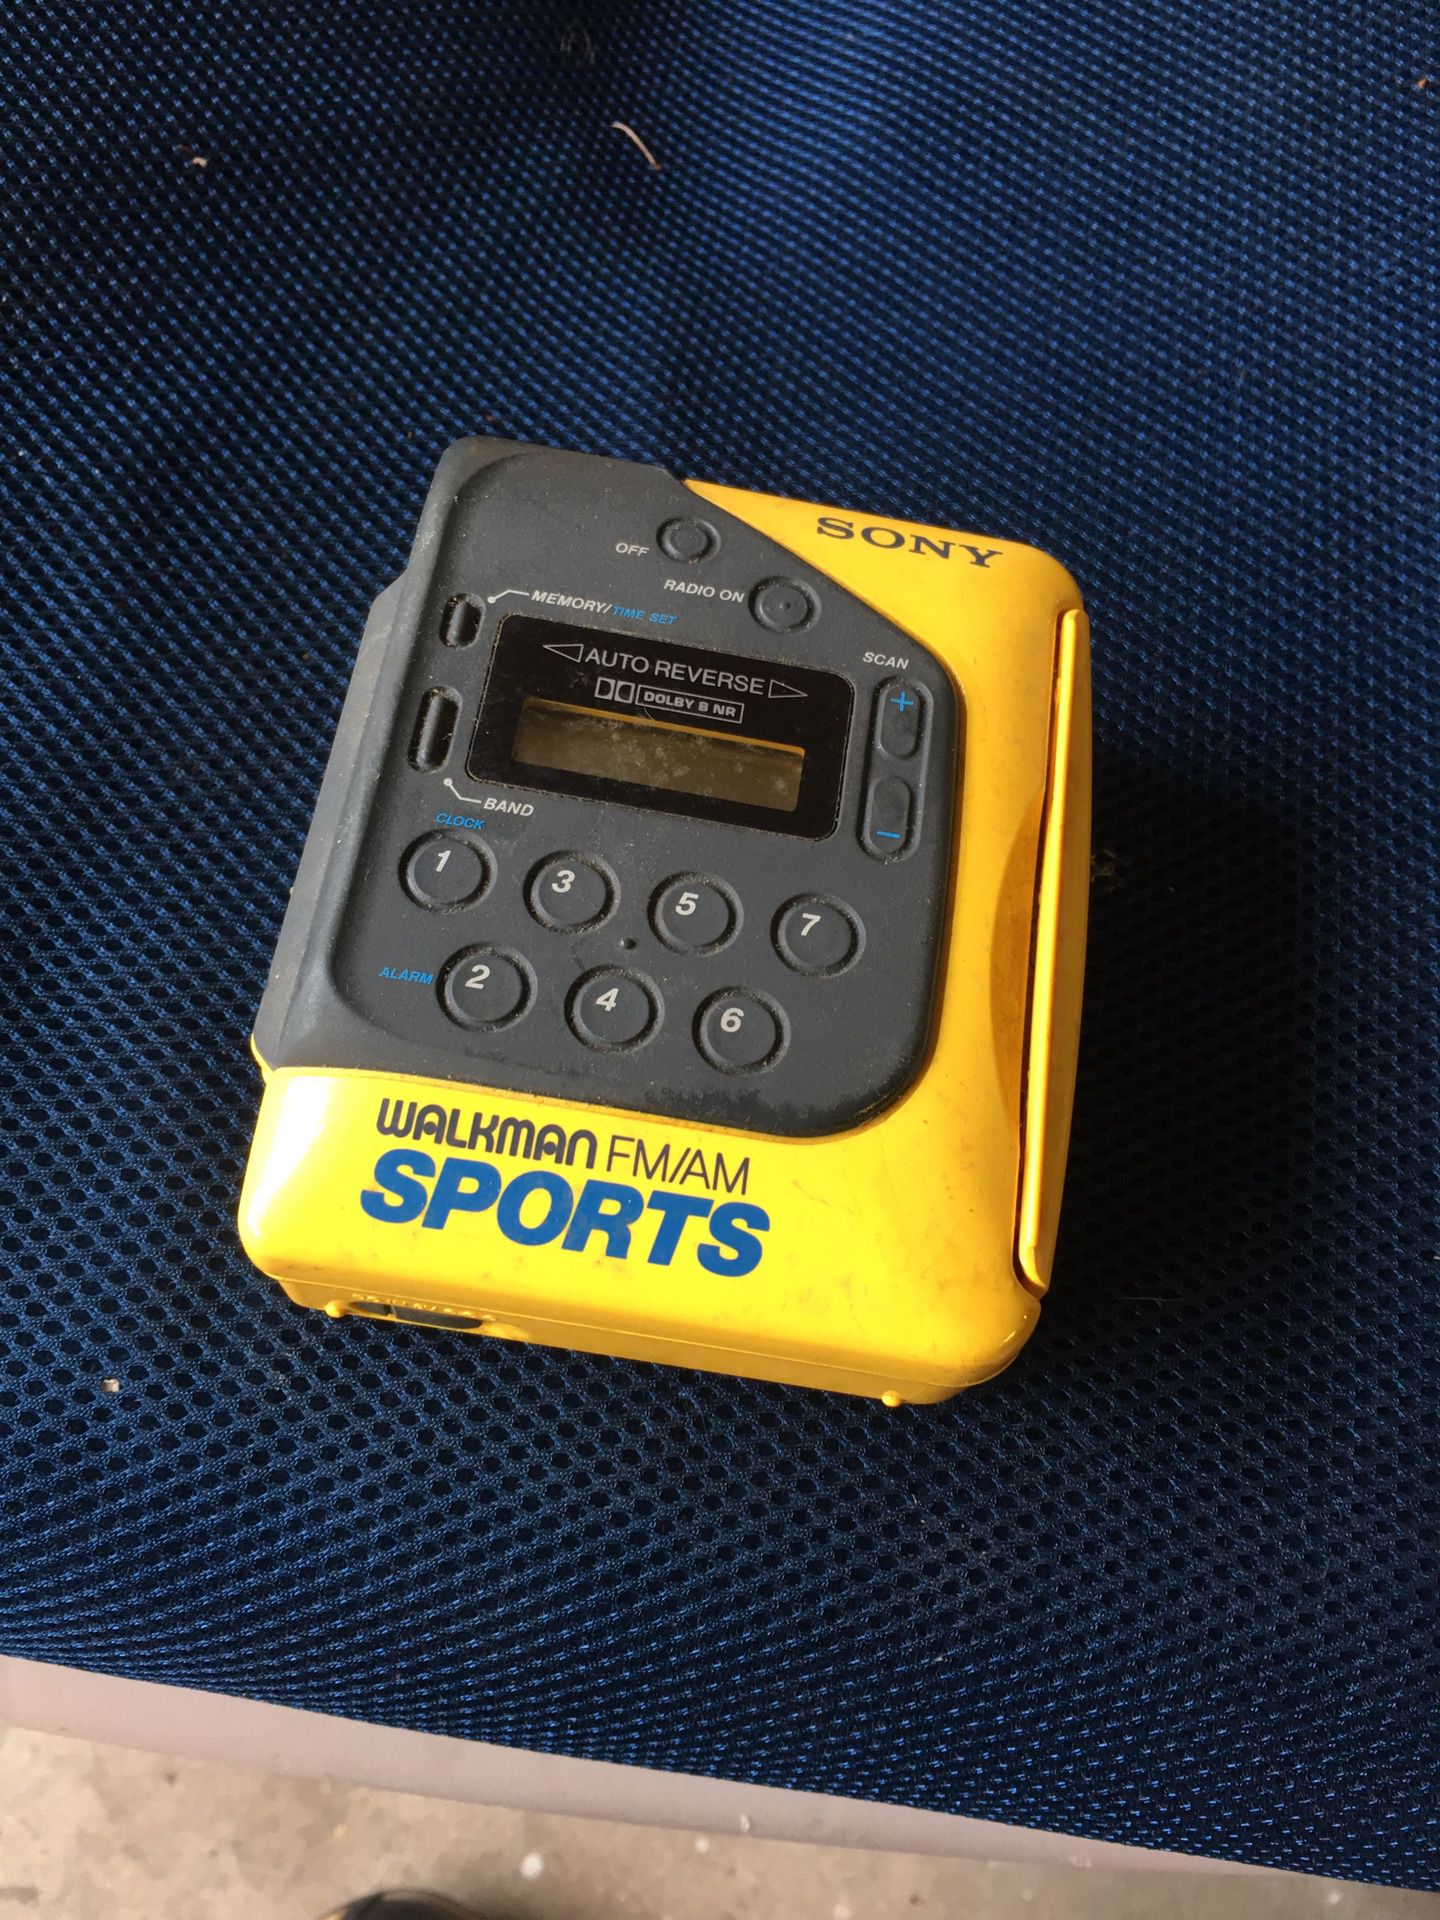 Sony sport Radio from the past